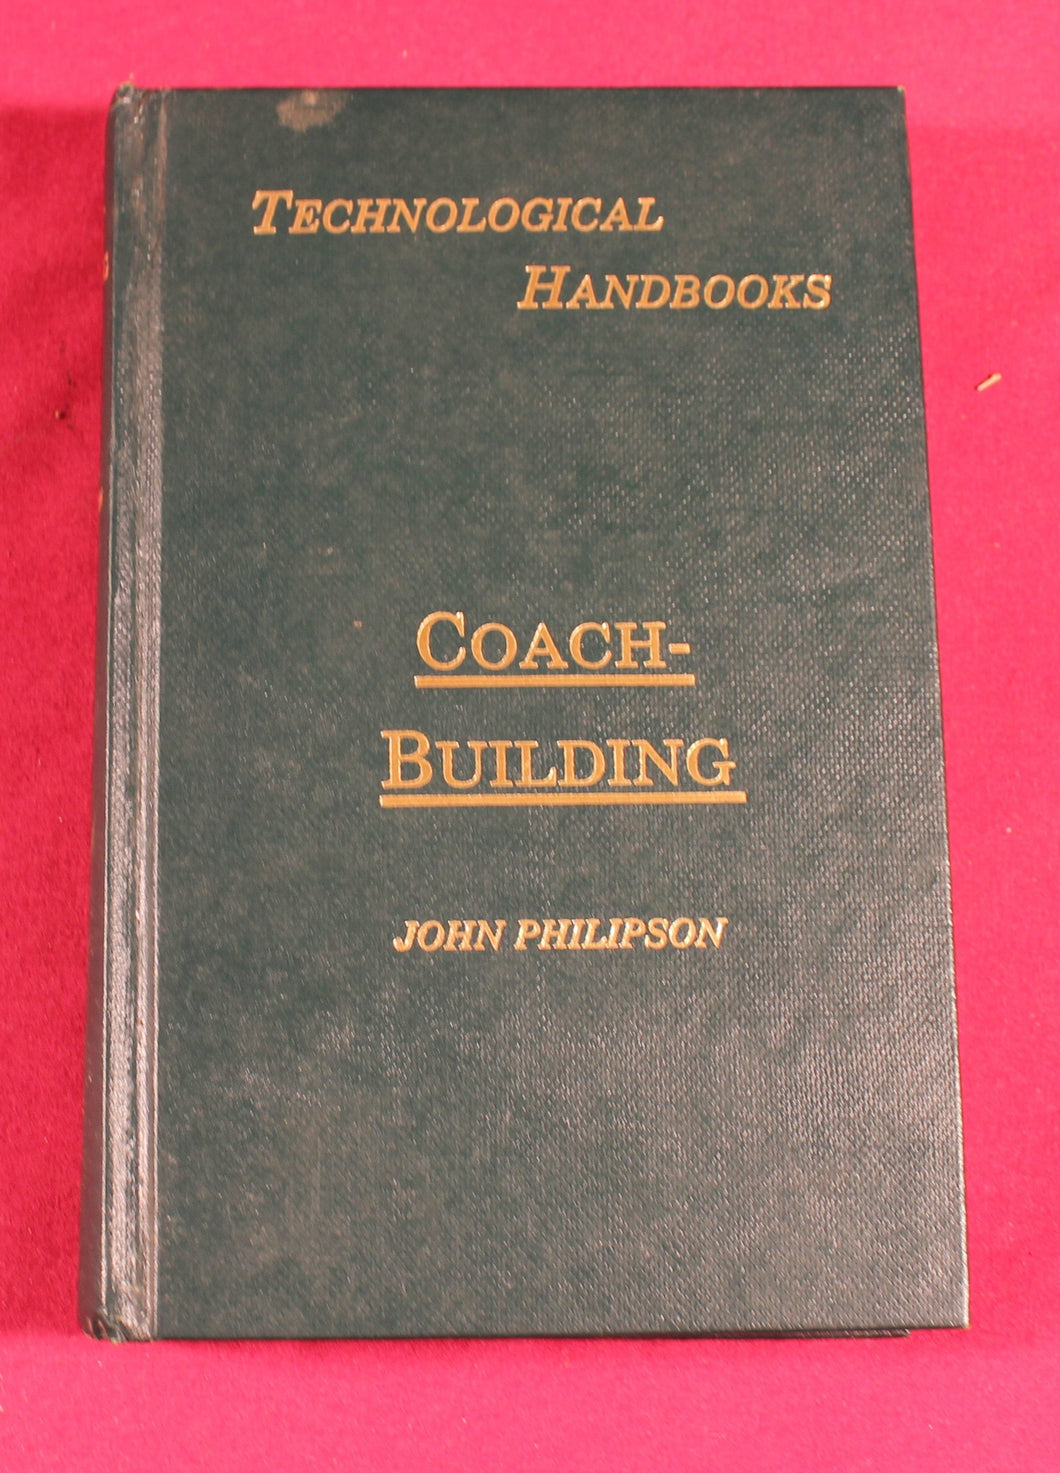 The Art and Craft of Coach-Building (1986 reprint of 1897 Edition) (Technological Handbooks) Reprint